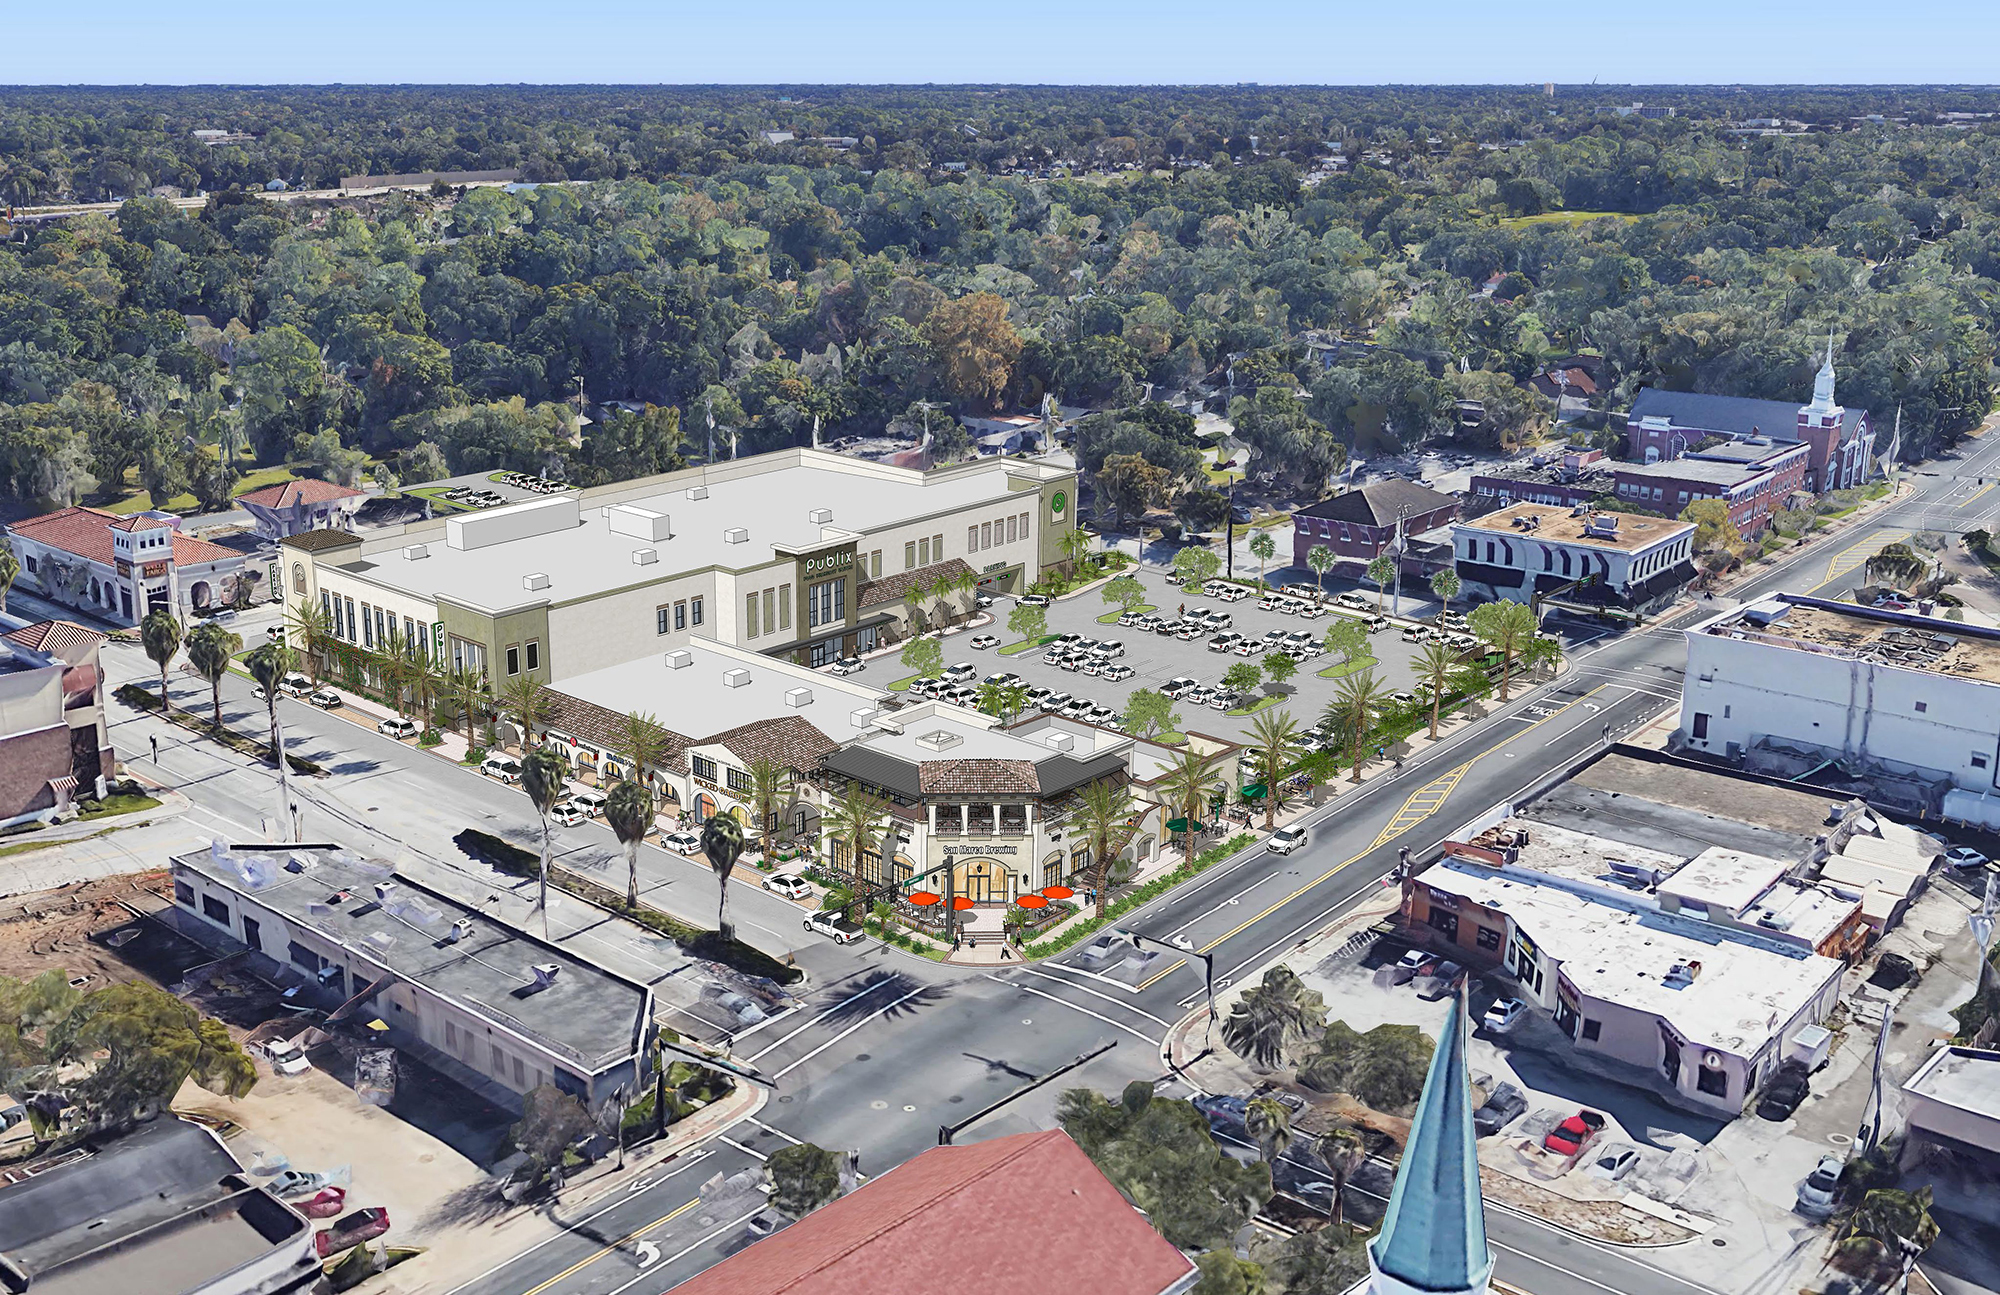 An artist's rendering of the East San Marco shopping center.